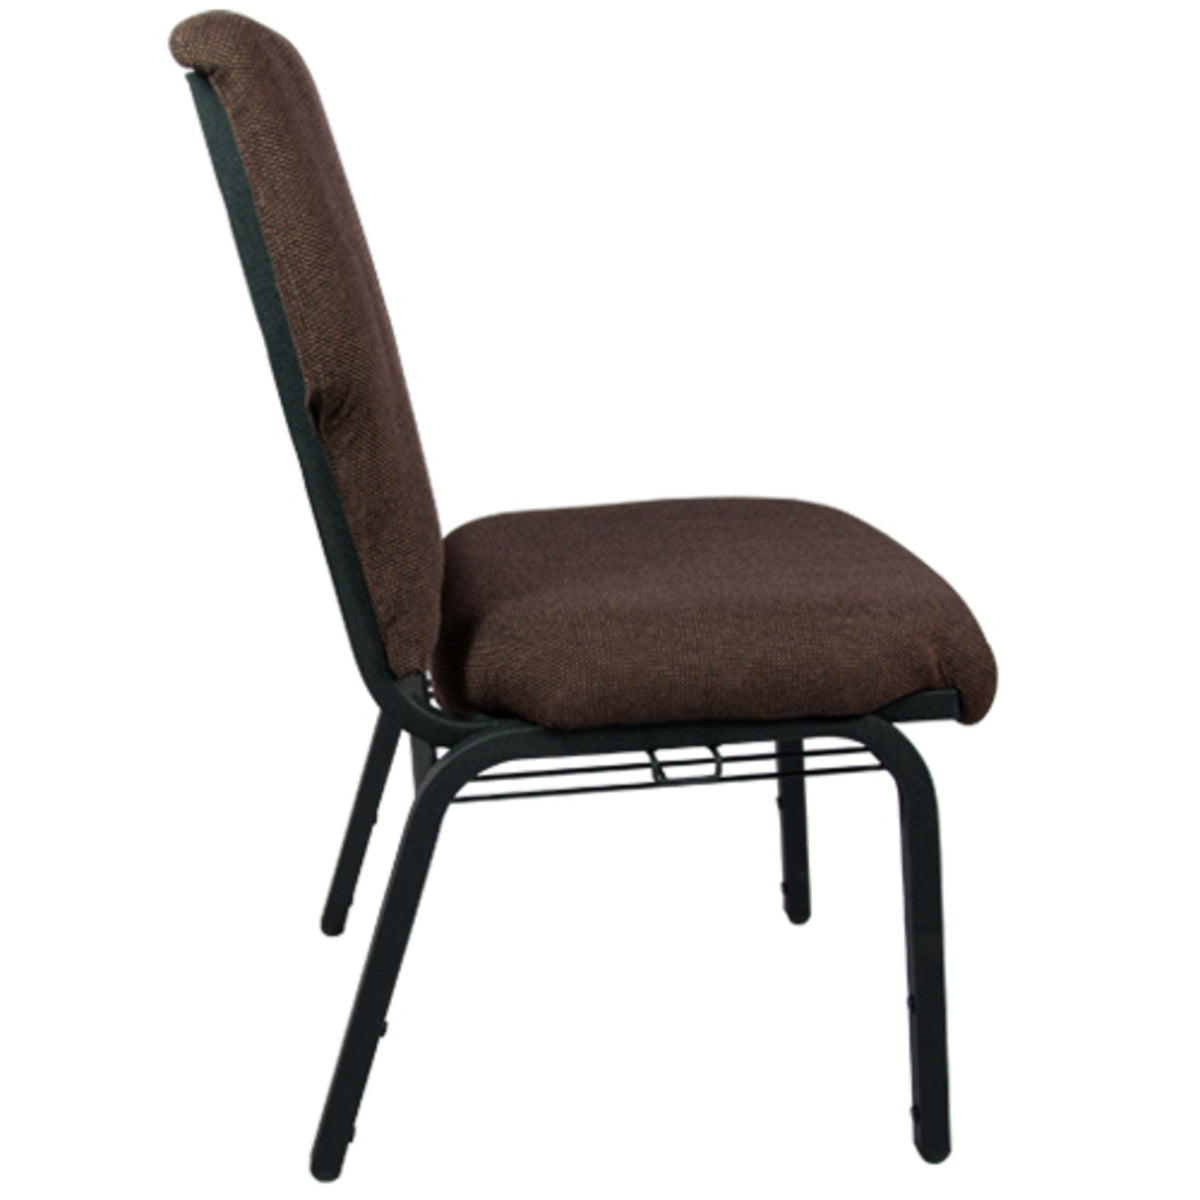 Java Fabric/Black Frame |#| Java Discount Church Chair - 21 in. Wide